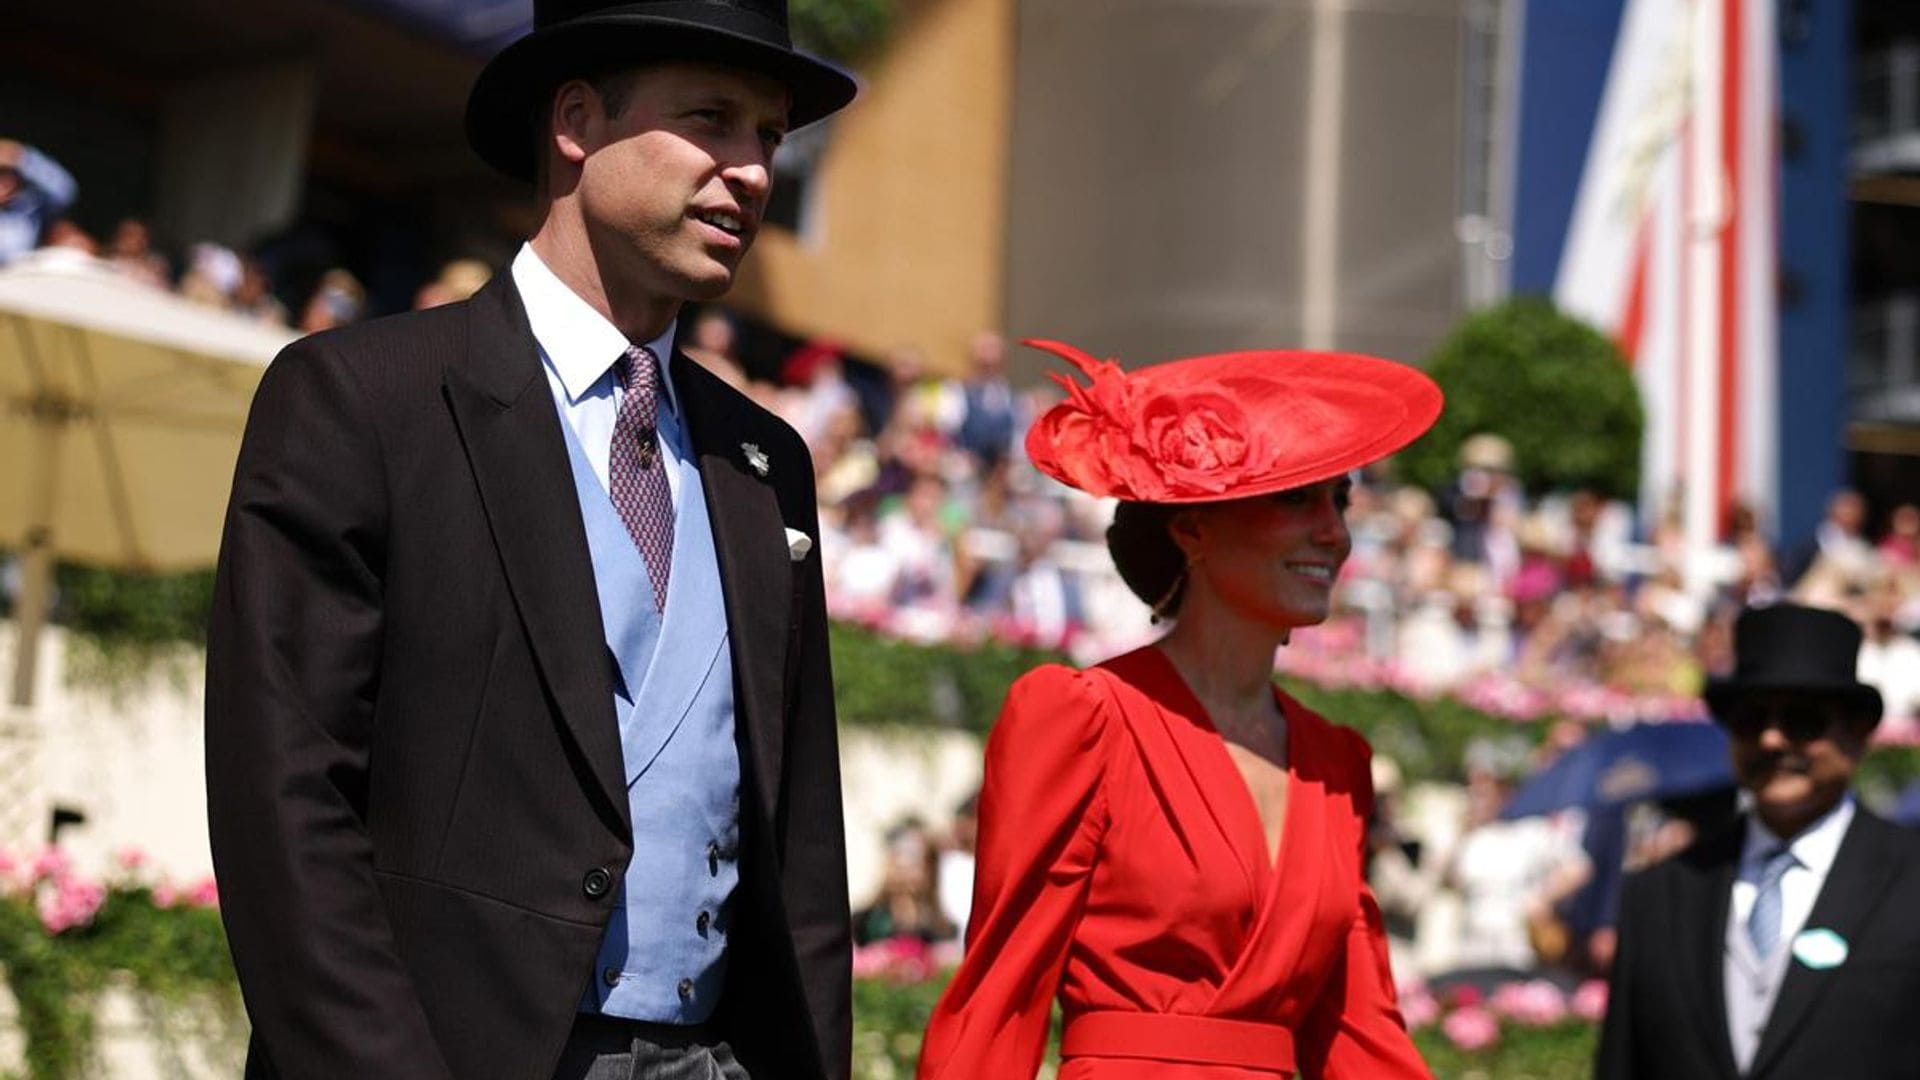 The Princess of Wales is radiant in red at Royal Ascot